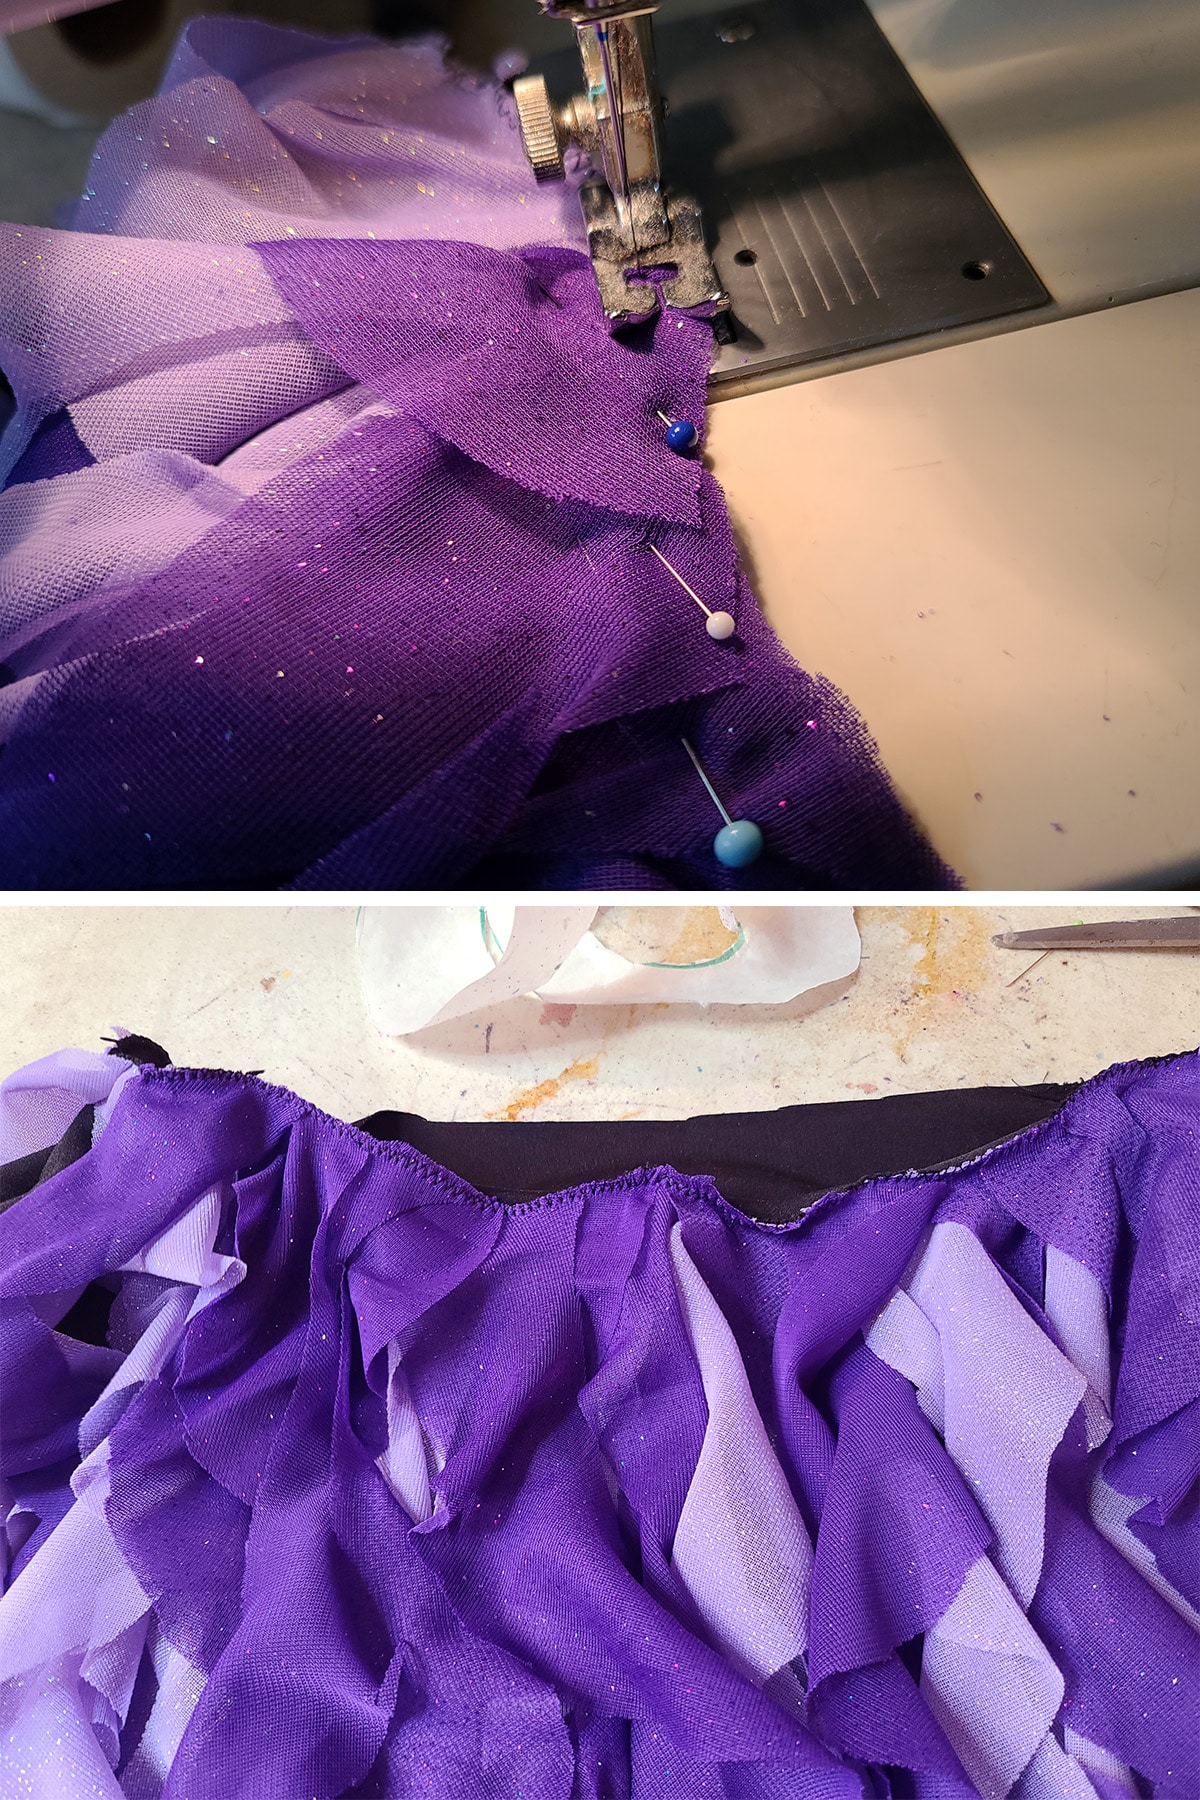 A 2 part image showing the 2 layers of ruffles being sewn down.